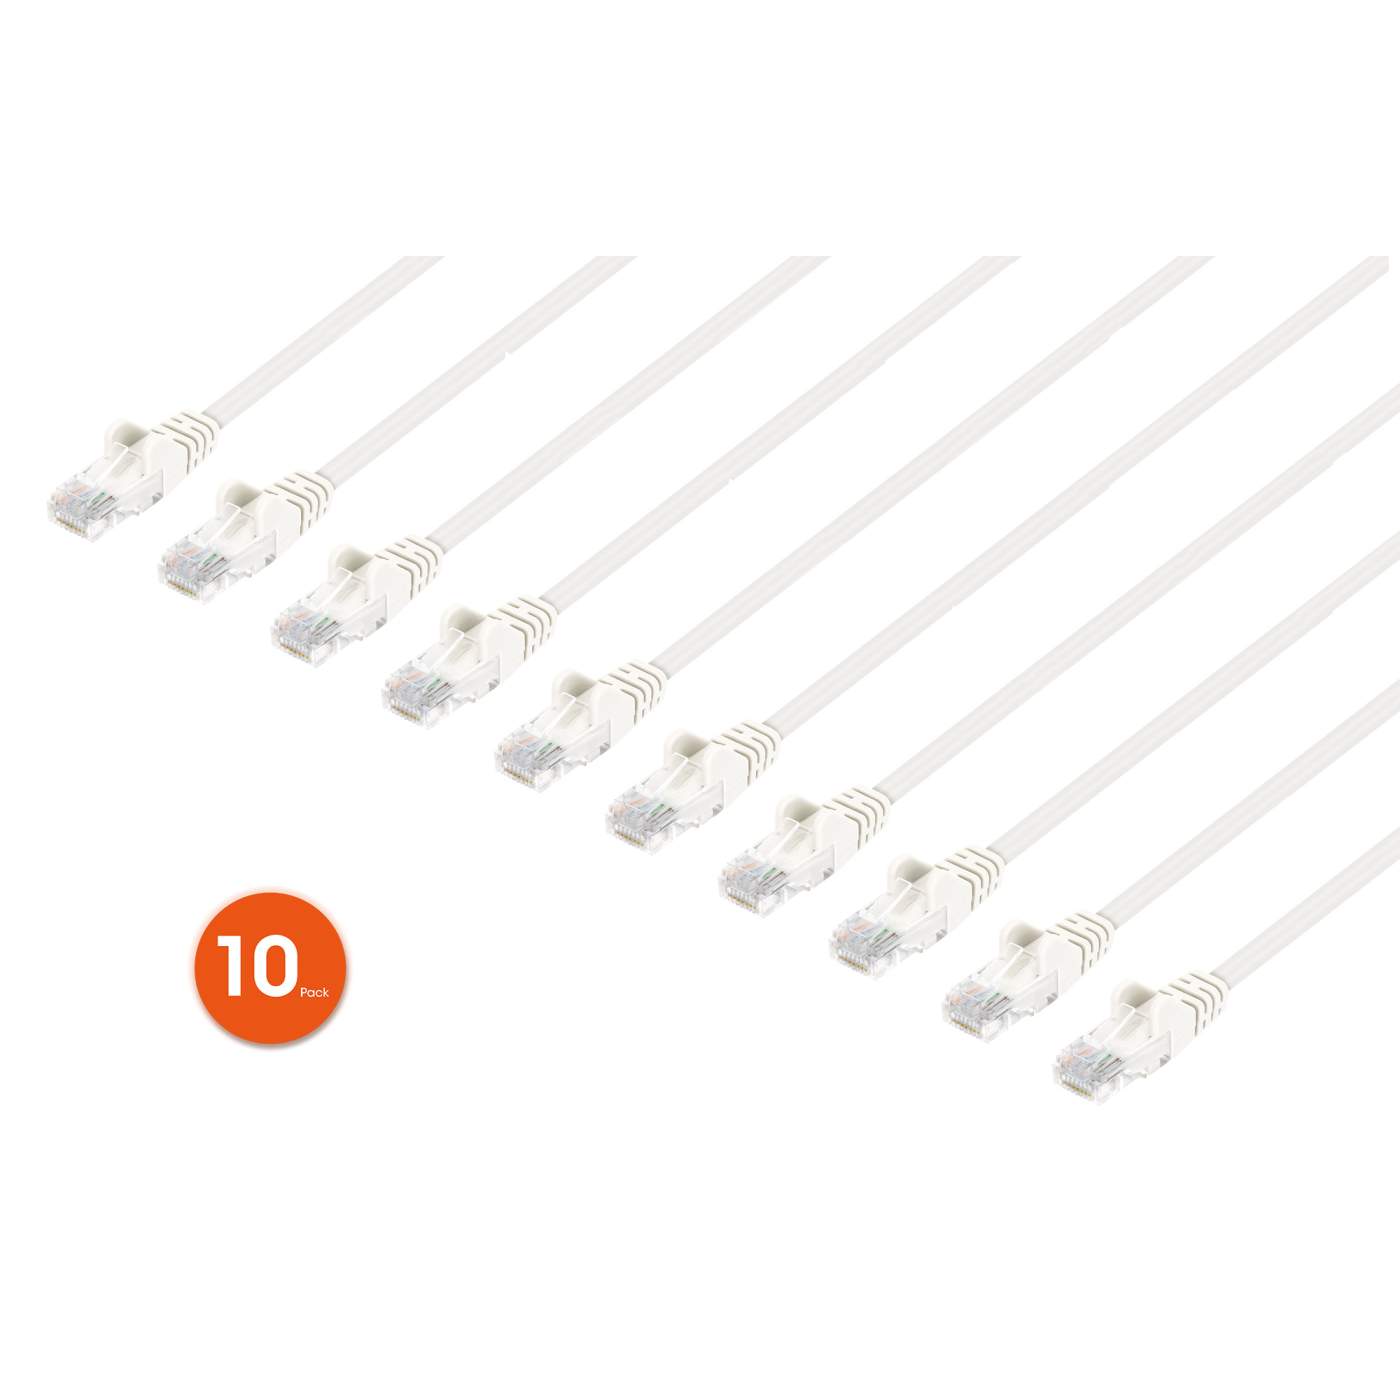 Cat6 U/UTP Slim Network Patch Cable, 3 ft., White, 10-Pack Image 1